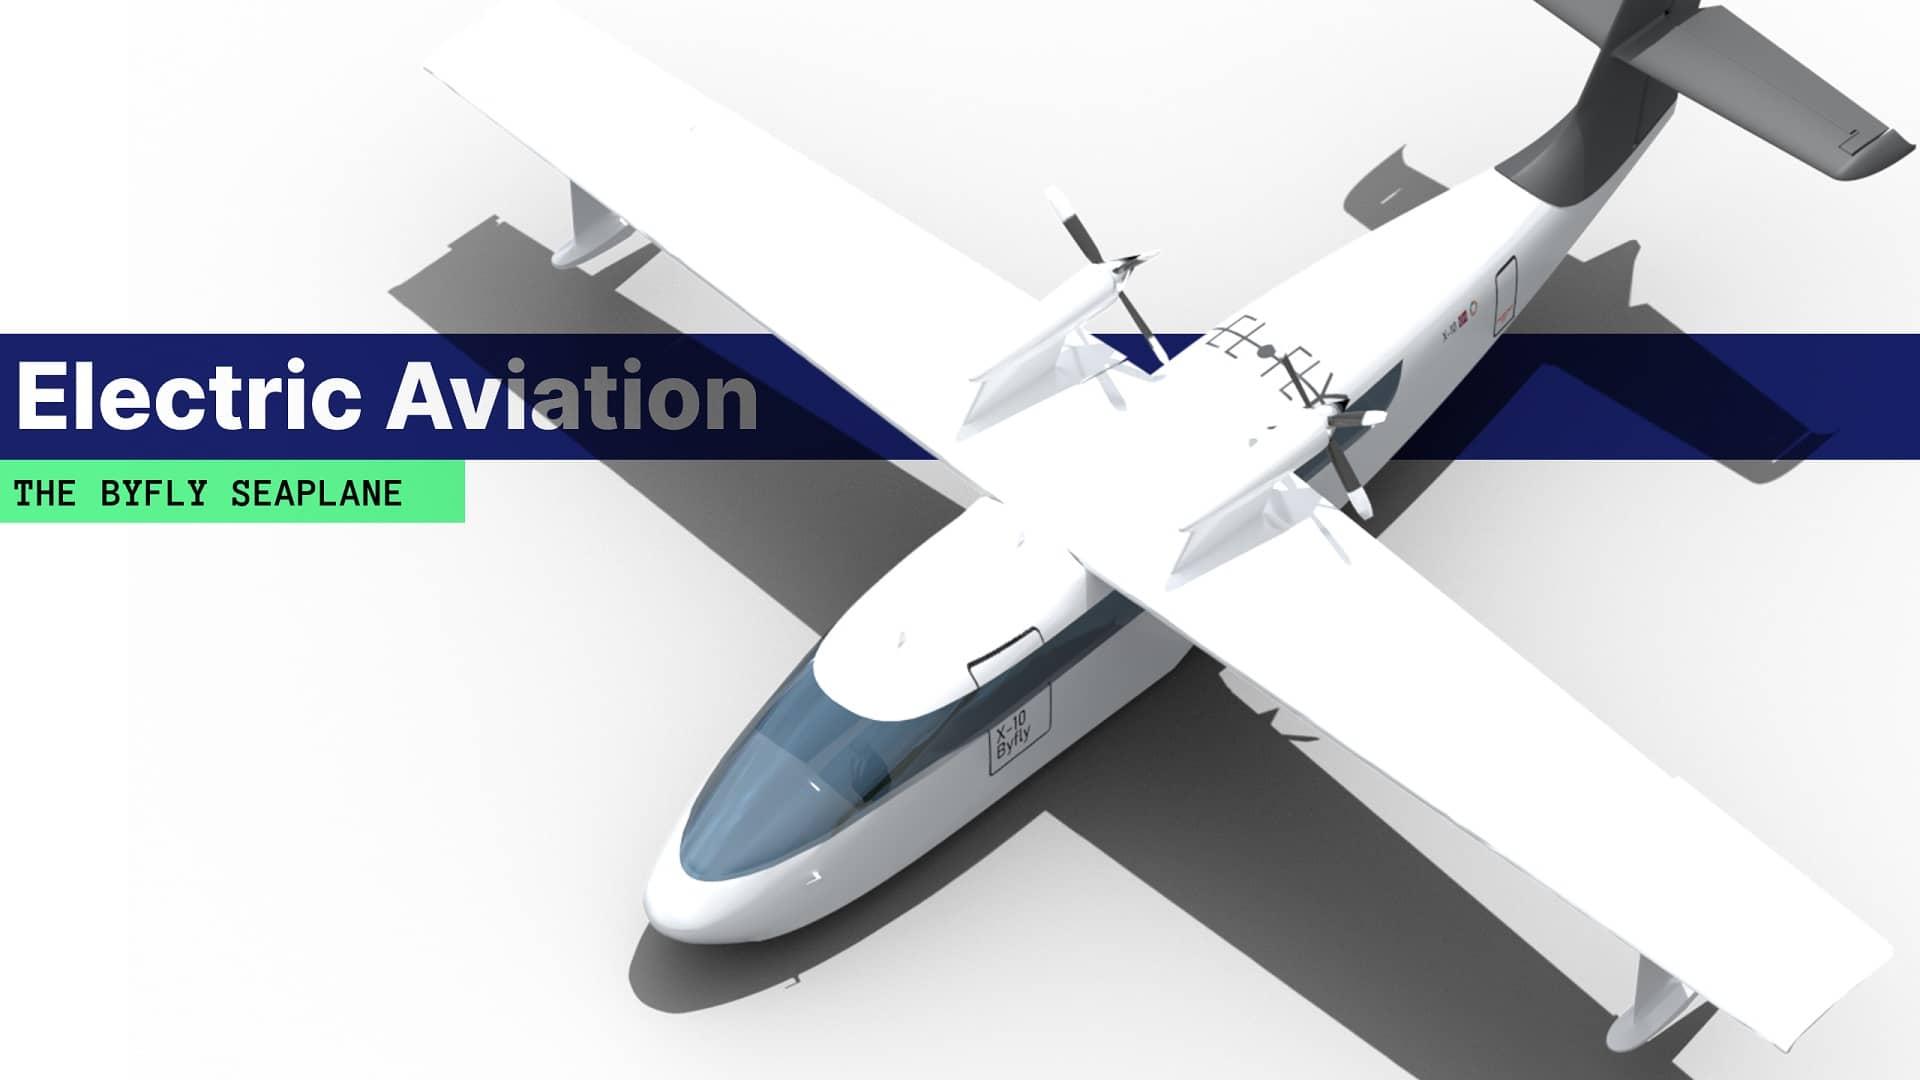 Electrict Aviation - The Byfly Seaplane